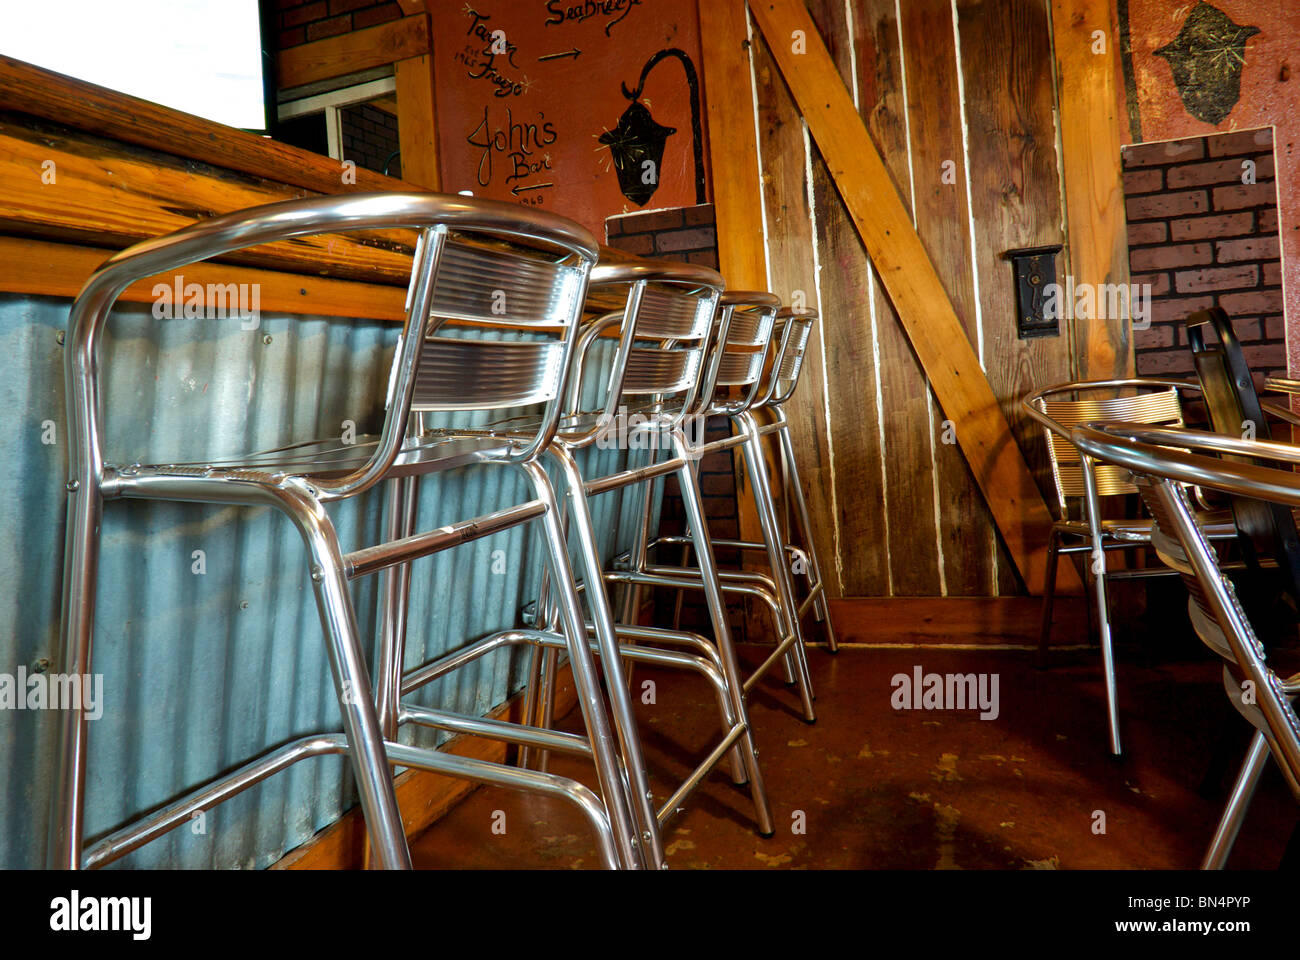 Aluminum bar stool chairs in T Boy's Cajun Grill diner restaurant in Creole LA Stock Photo